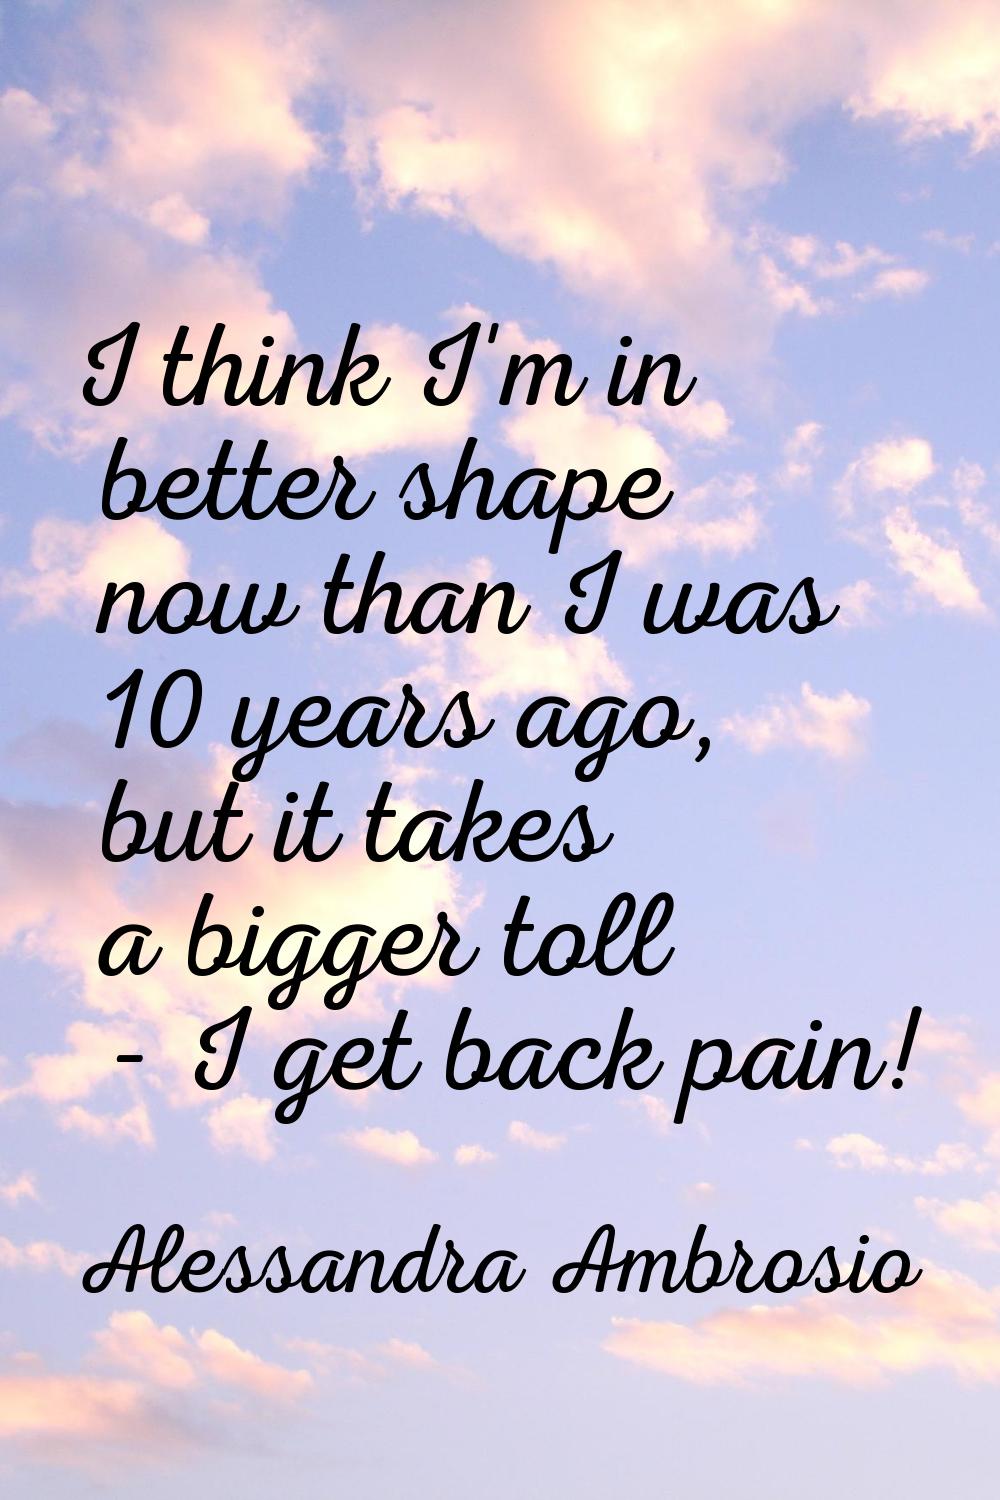 I think I'm in better shape now than I was 10 years ago, but it takes a bigger toll - I get back pa